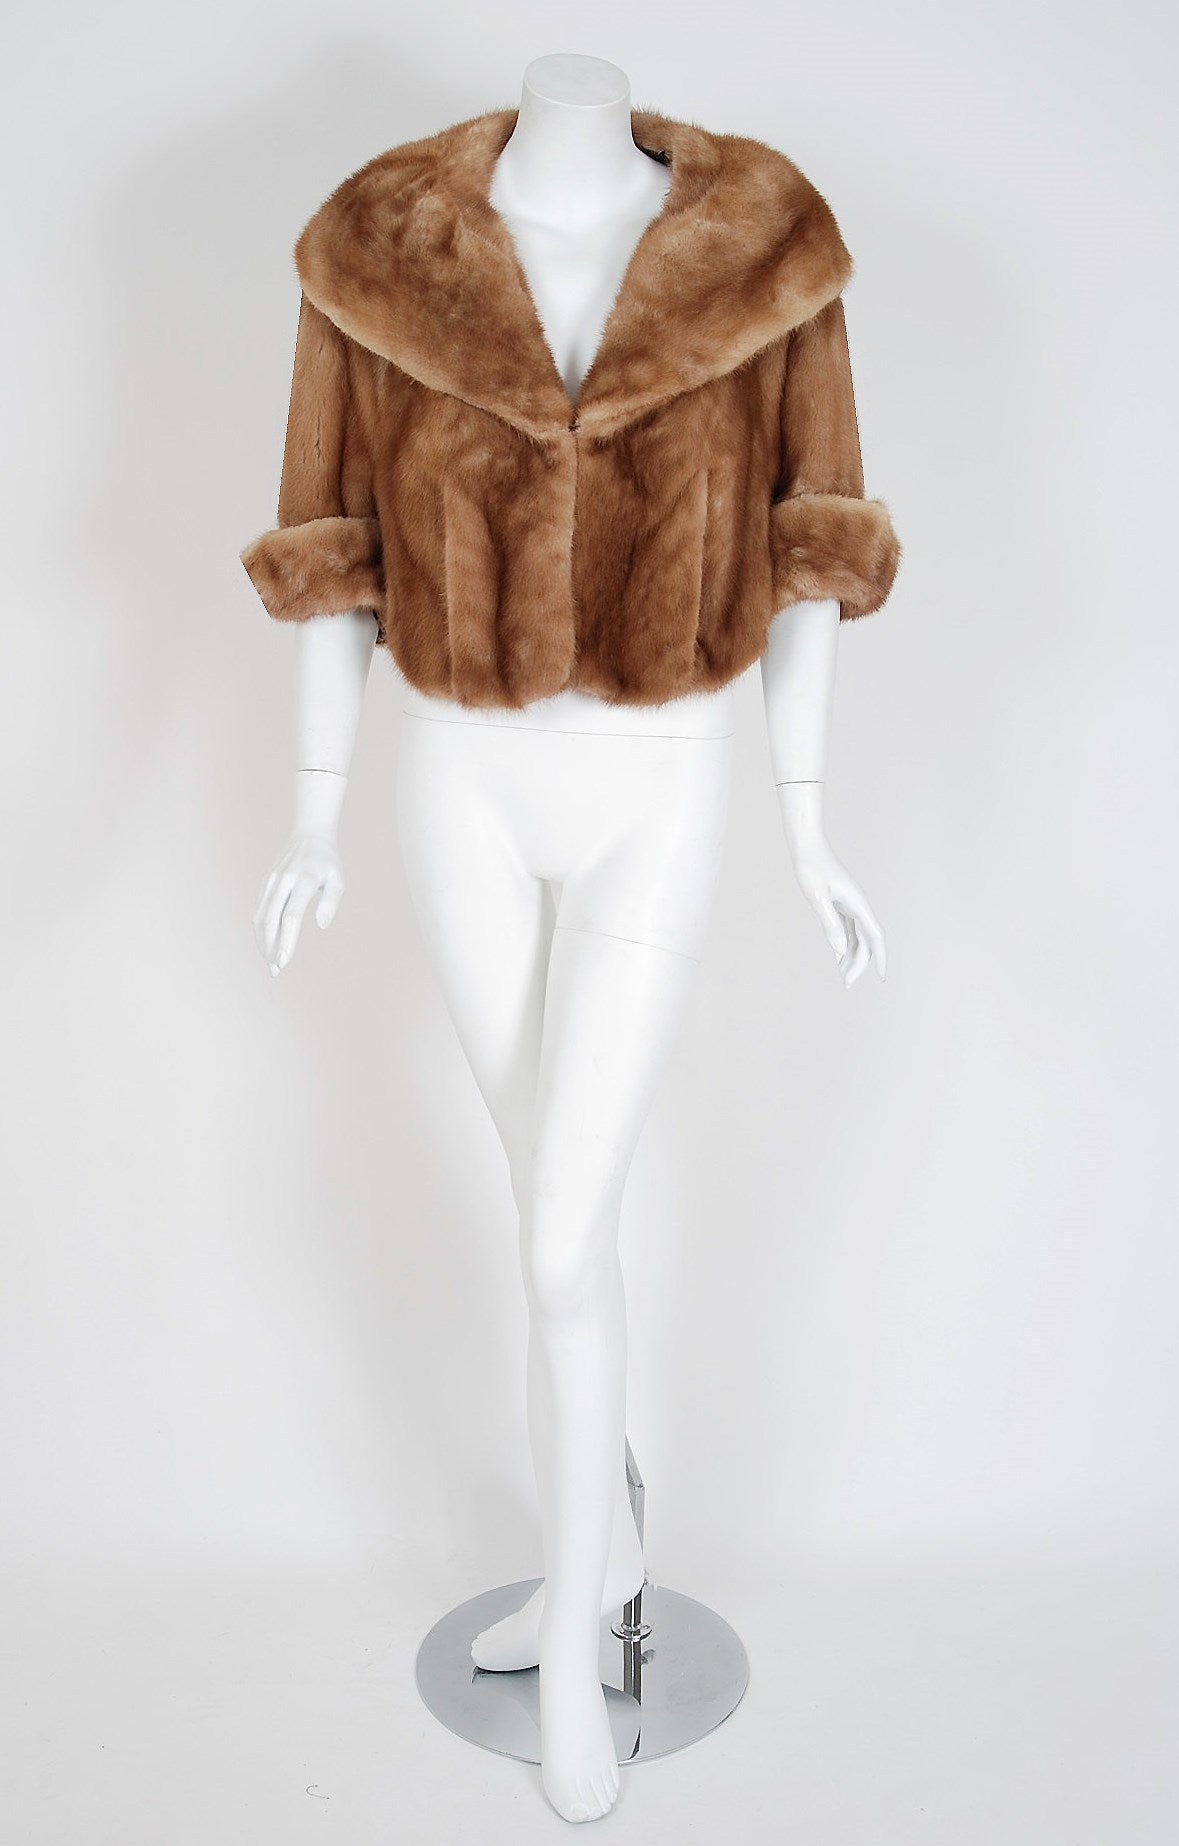 An extraordinary, honey-brown colored genuine mink-fur that will make any woman shine during the upcoming winter season! Oleg Cassini was a French-born American fashion designer who dressed numerous stars, creating some of the most memorable moments